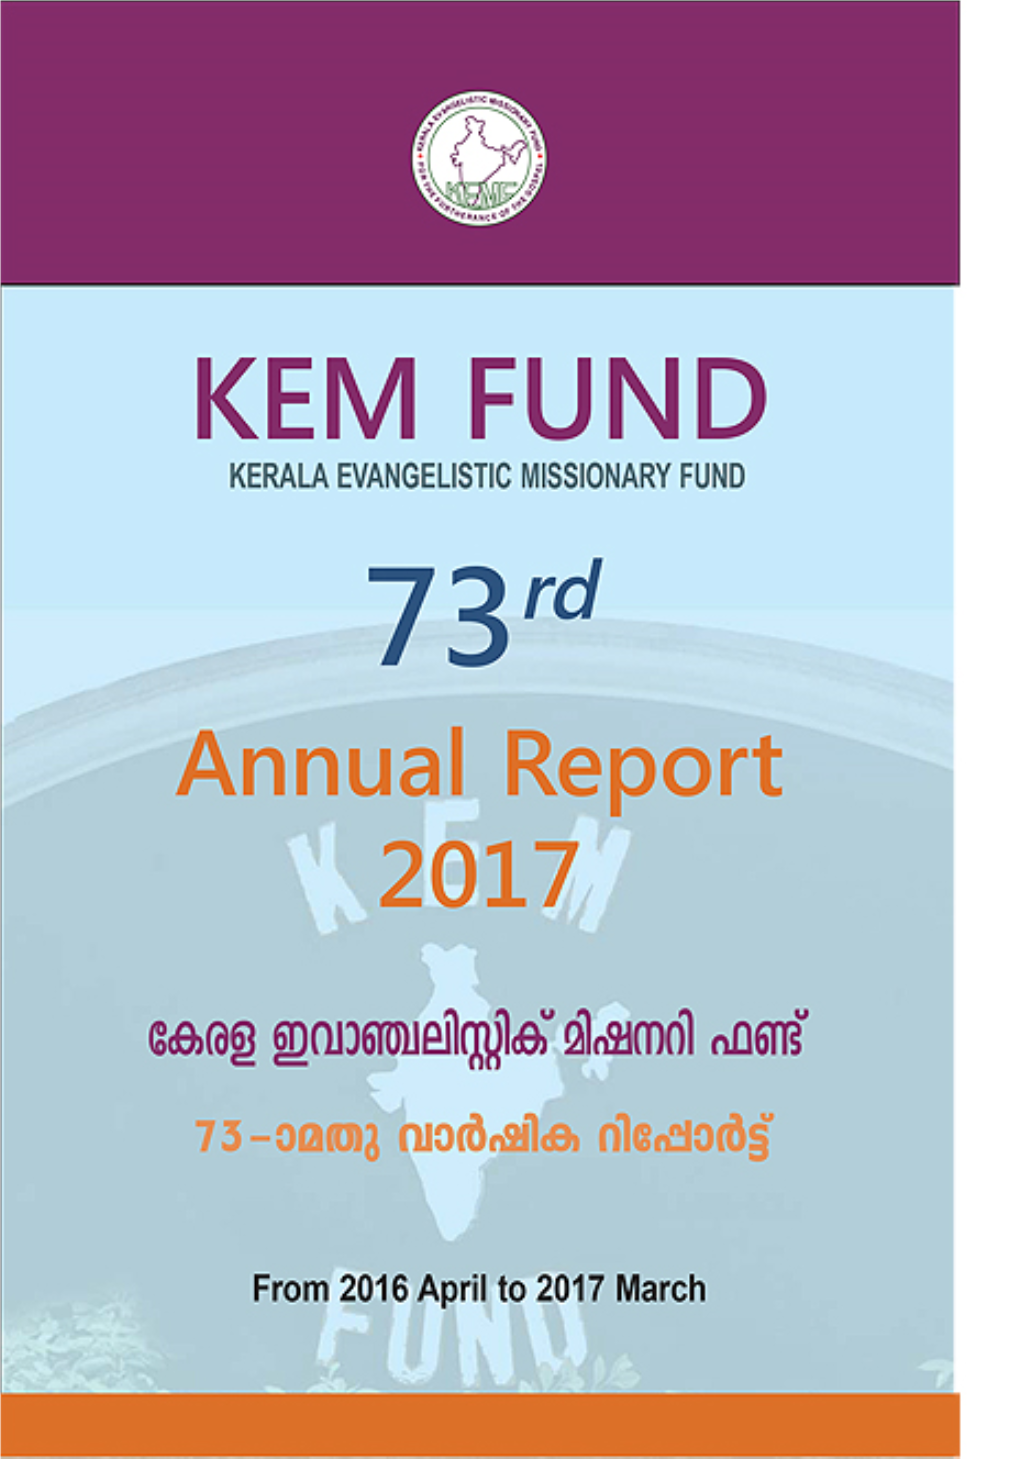 Kerala Evangelistic Missionary Fund 73Rd ANNUAL REPORT 2017